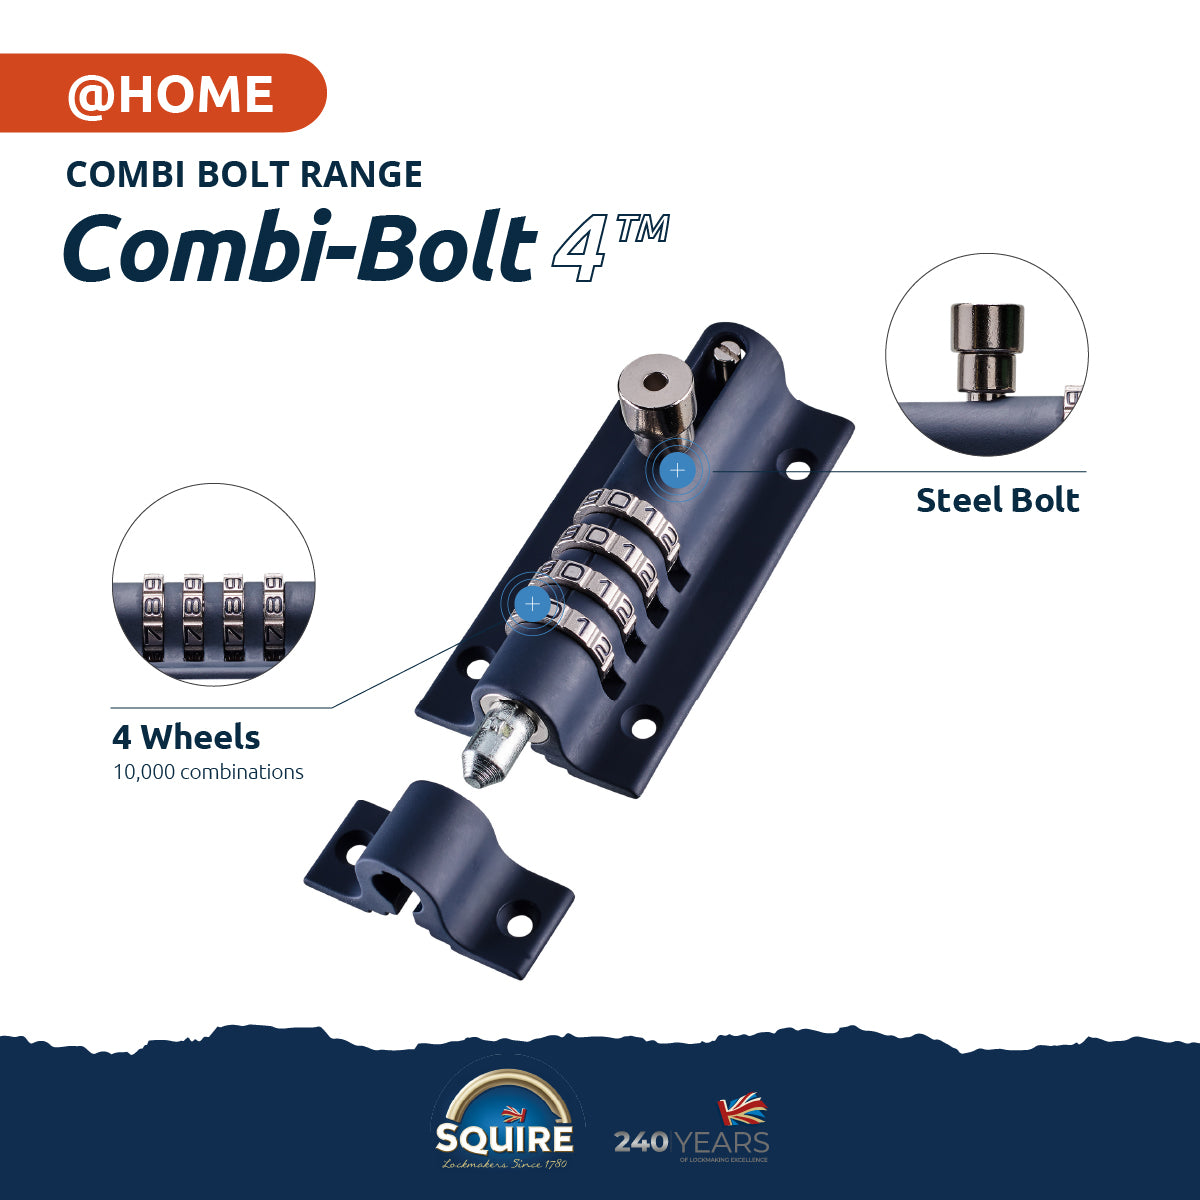 Combi-Bolt Product Specifications 4